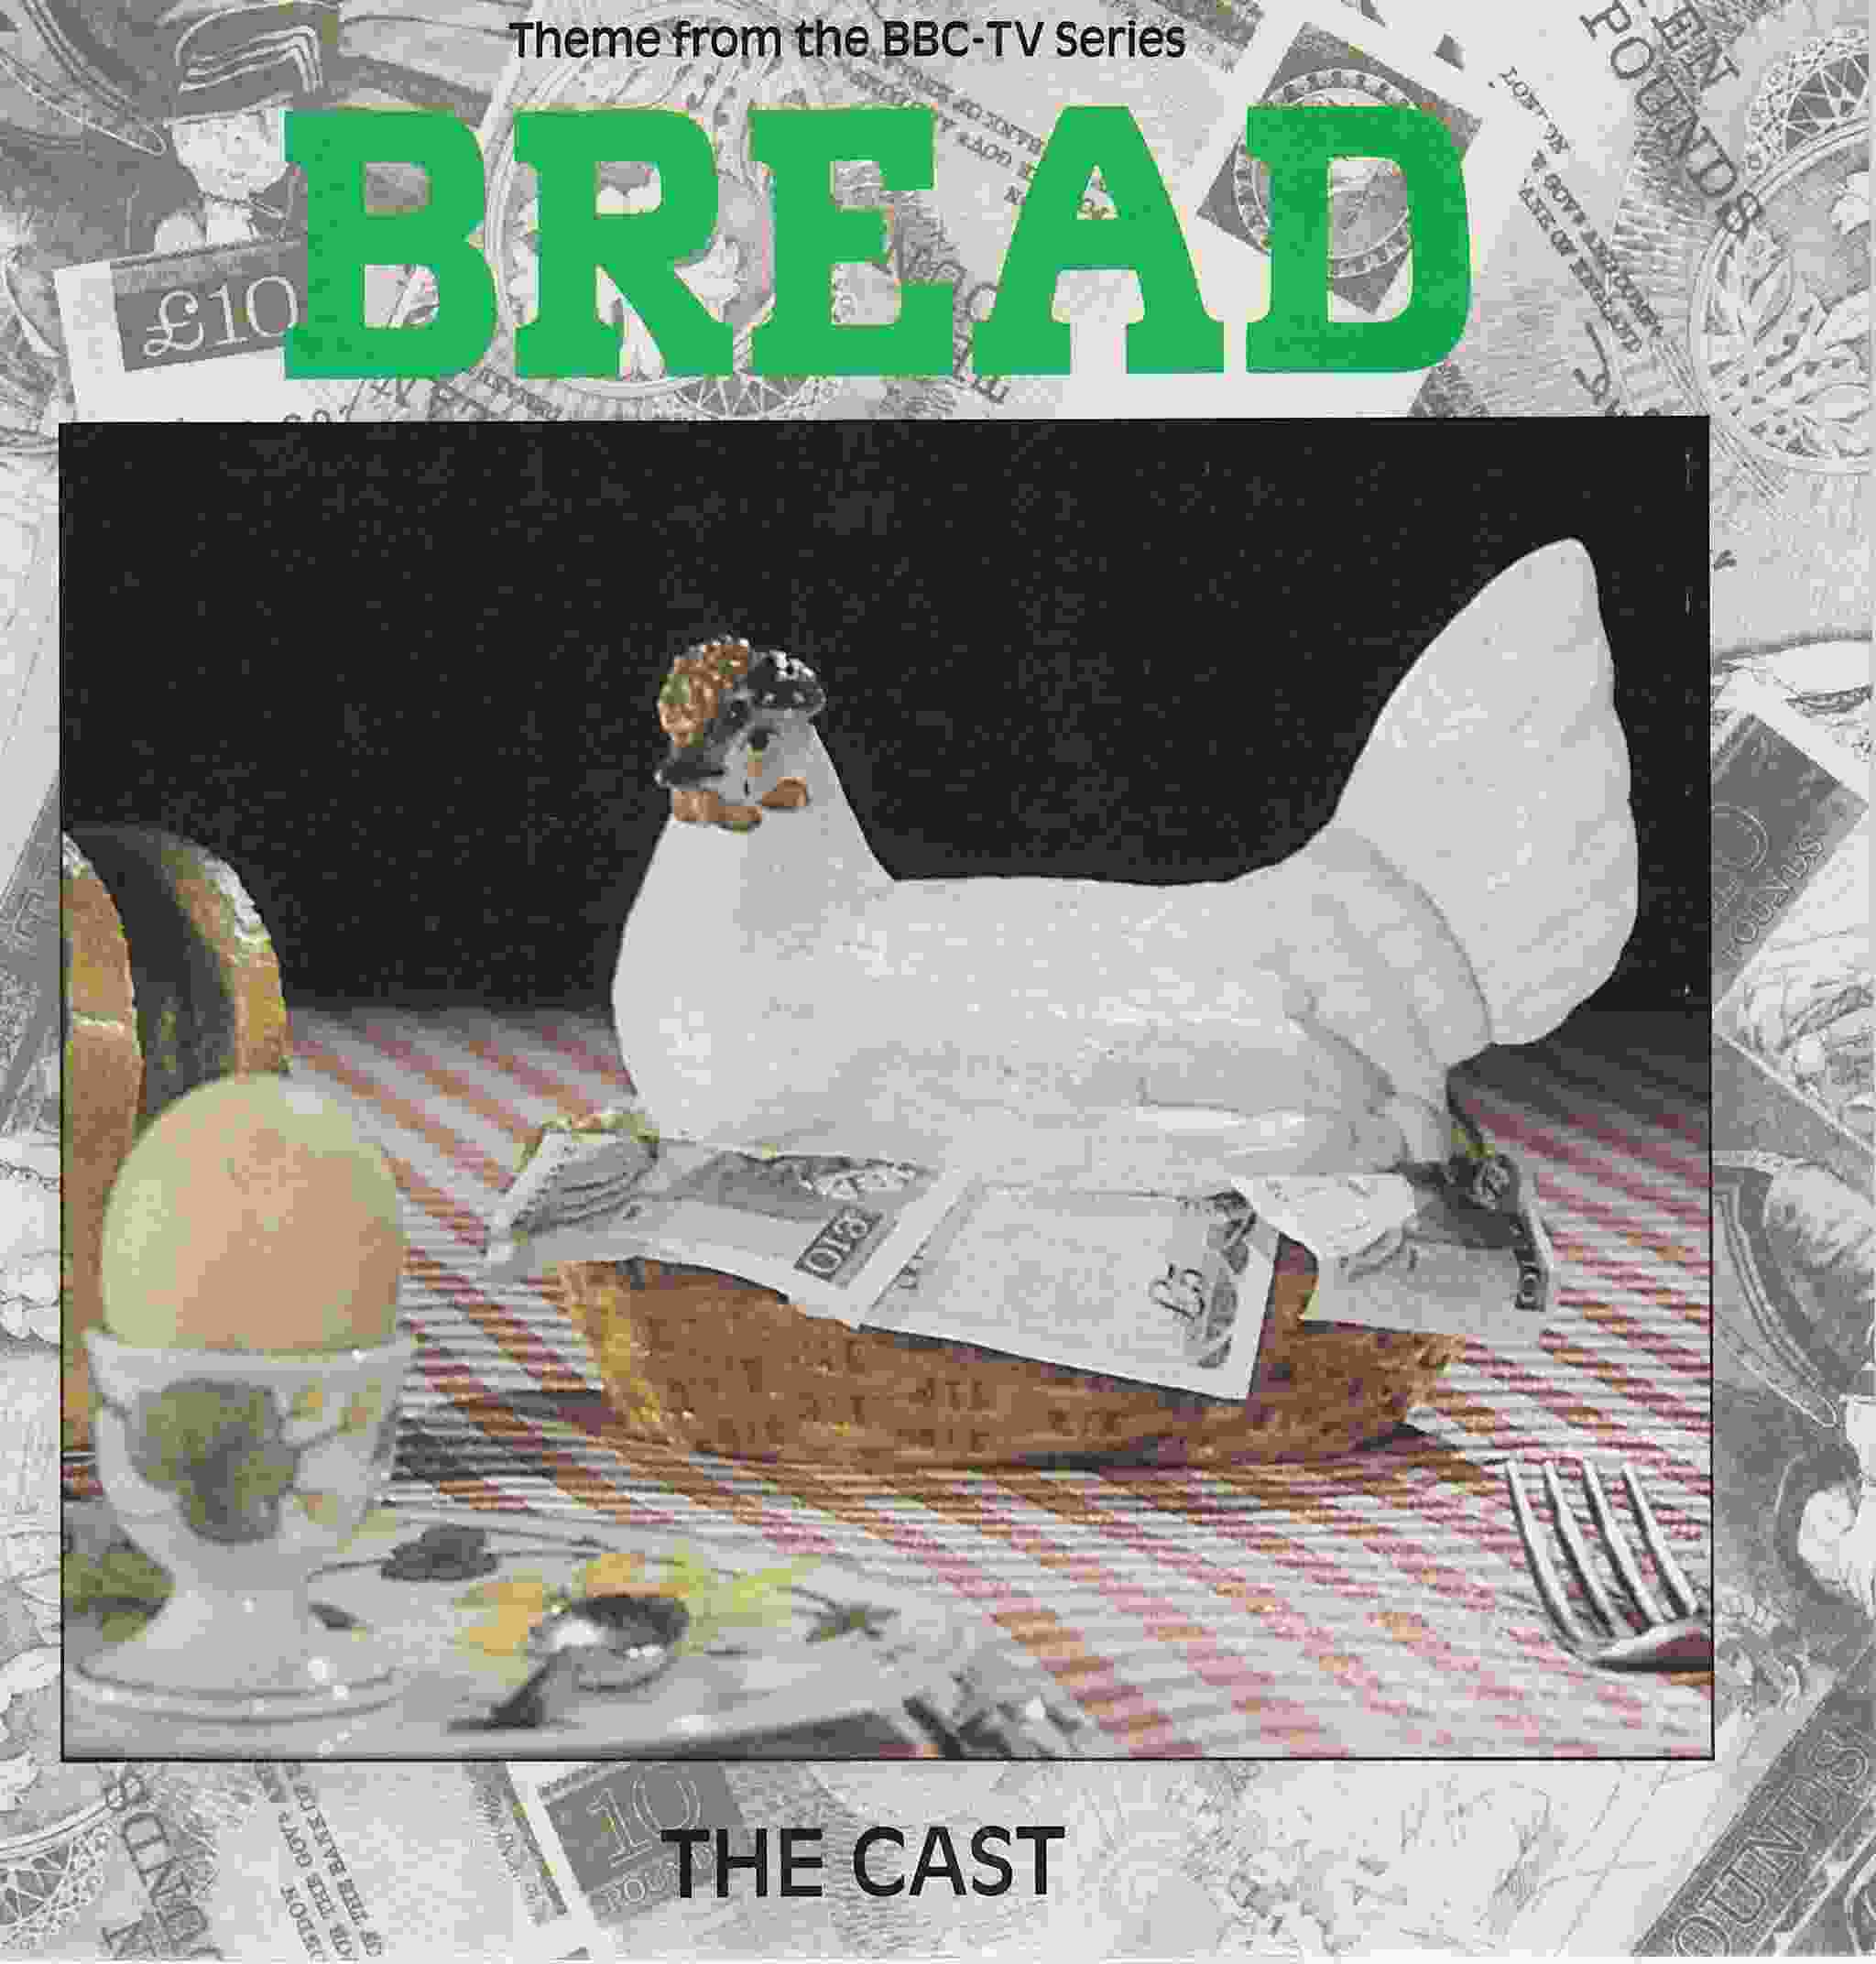 Picture of RESL 186 Home (Bread) by artist Carla Lane / David Mackay / The Cast / Nick Conway from the BBC records and Tapes library